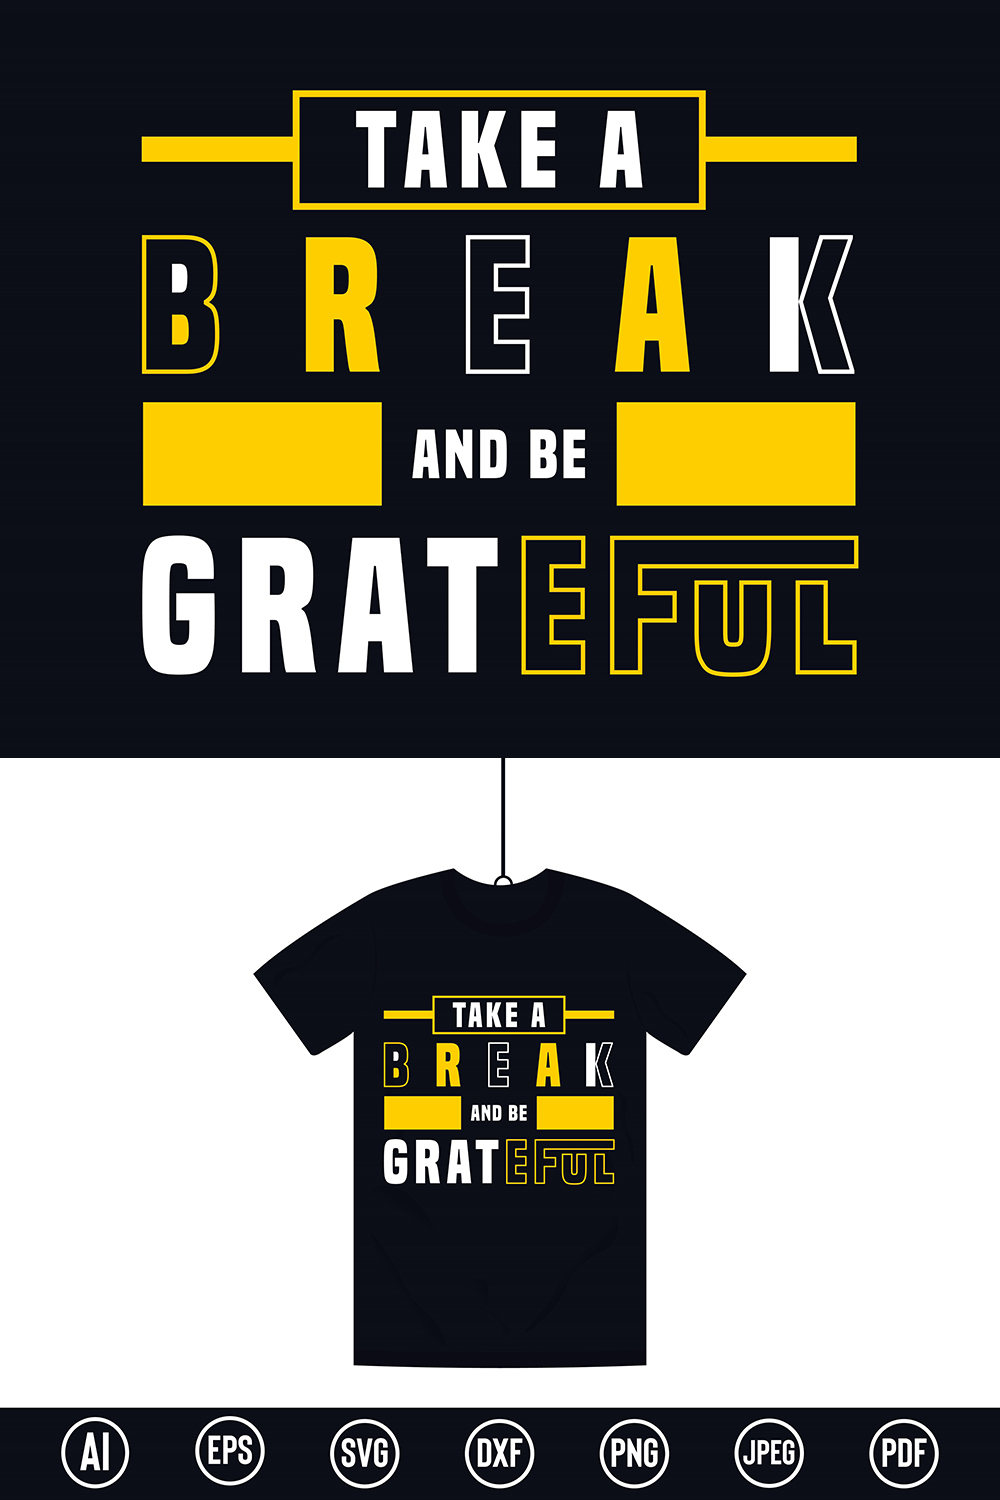 Modern T-Shirt design with “Take a break and be grateful” quote for t-shirt, posters, stickers, mug prints, banners, gift cards, labels etc pinterest preview image.